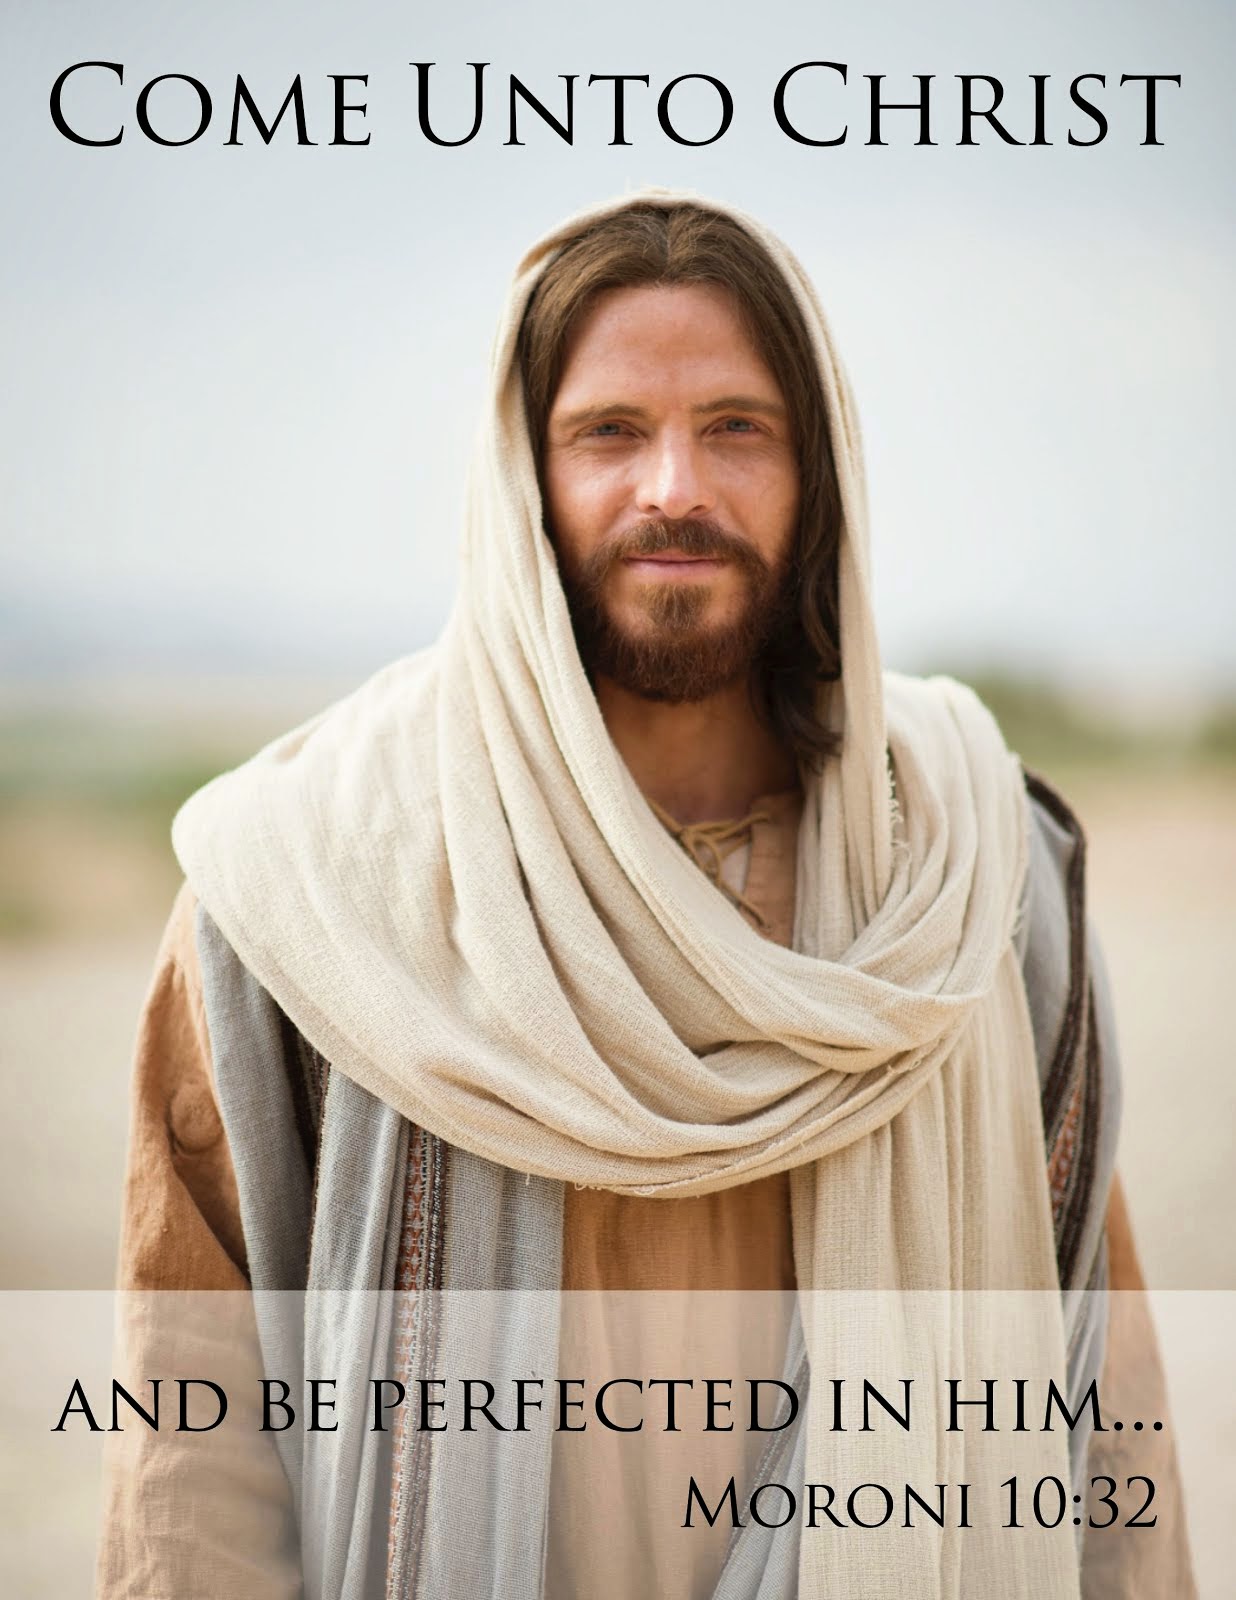 Learn more about Jesus Christ.